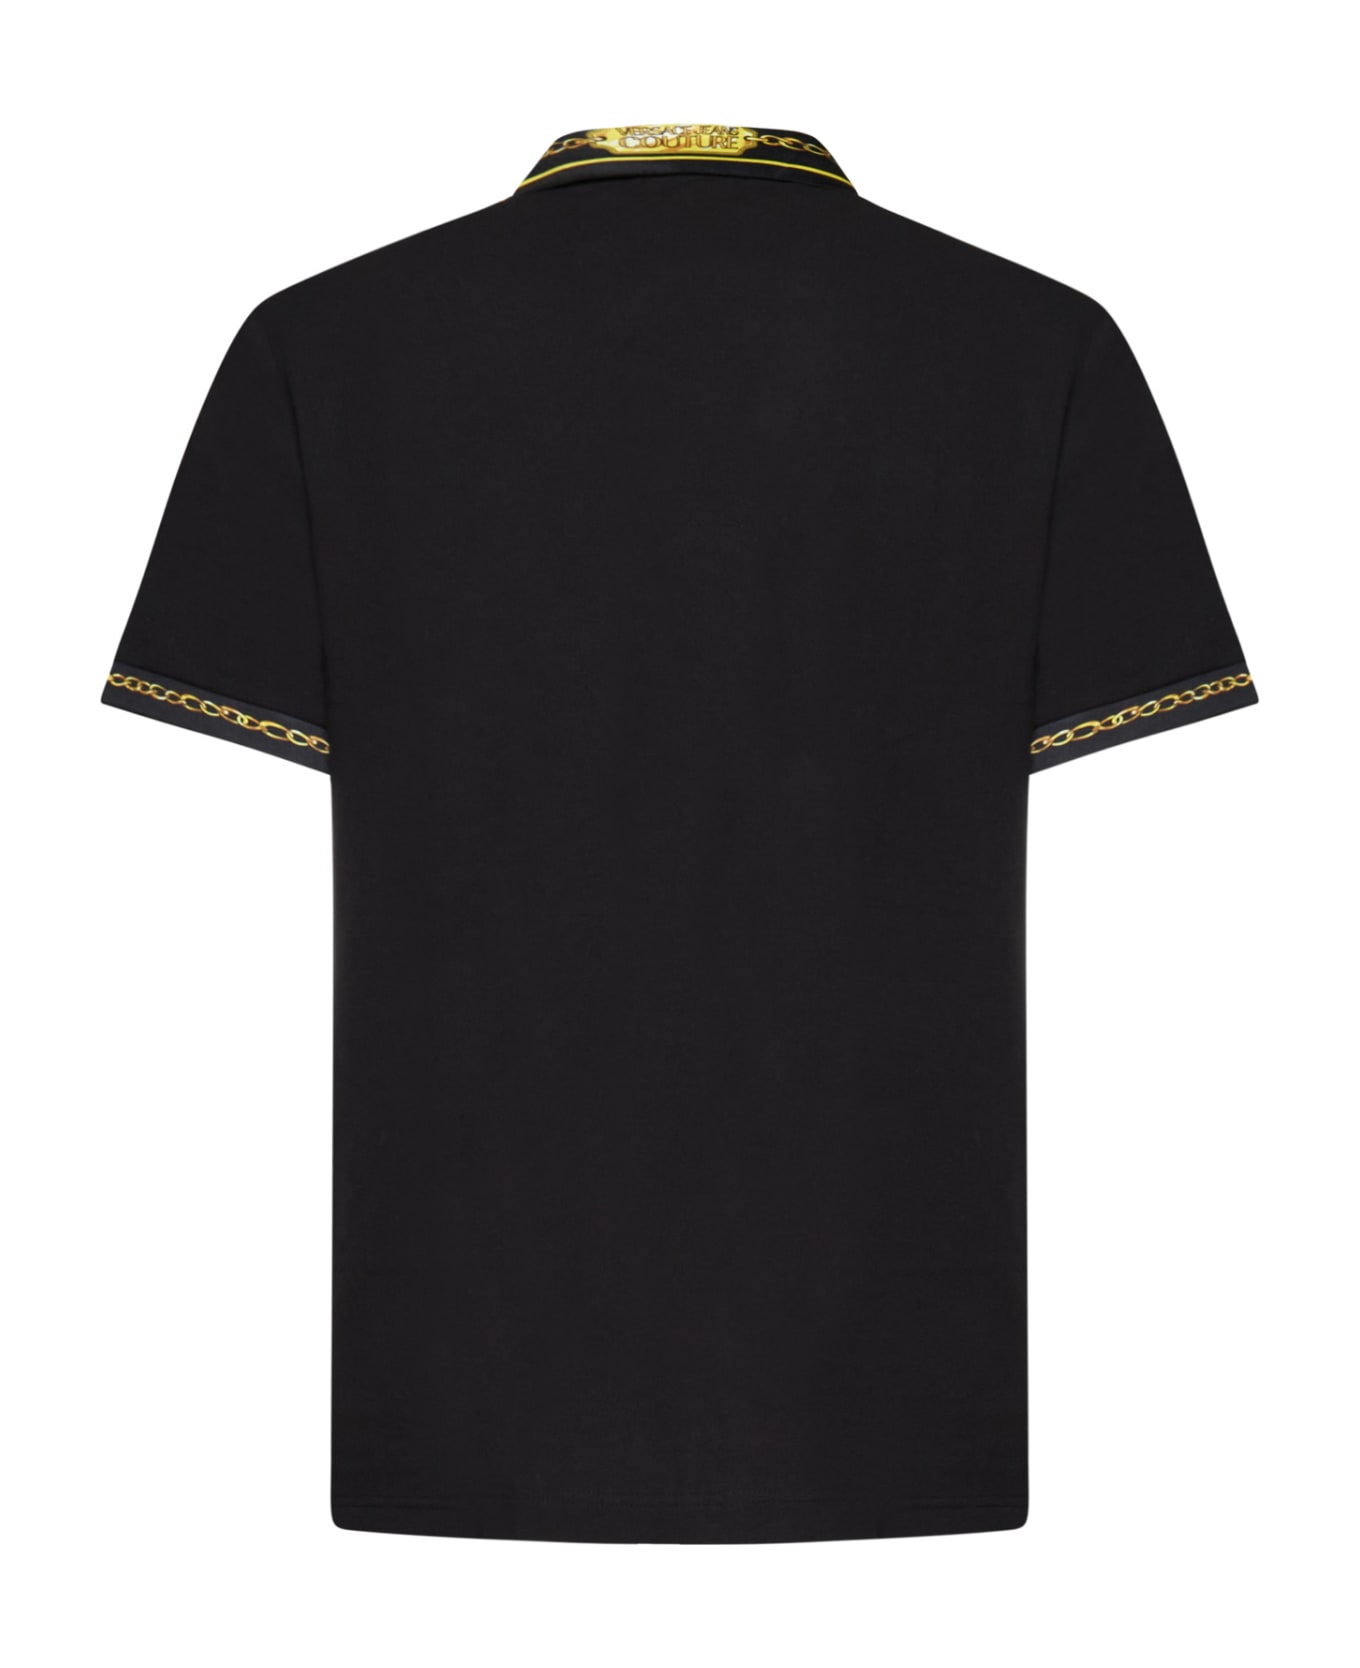 Versace Jeans Couture Chain-link Polo Shirt - Black gold